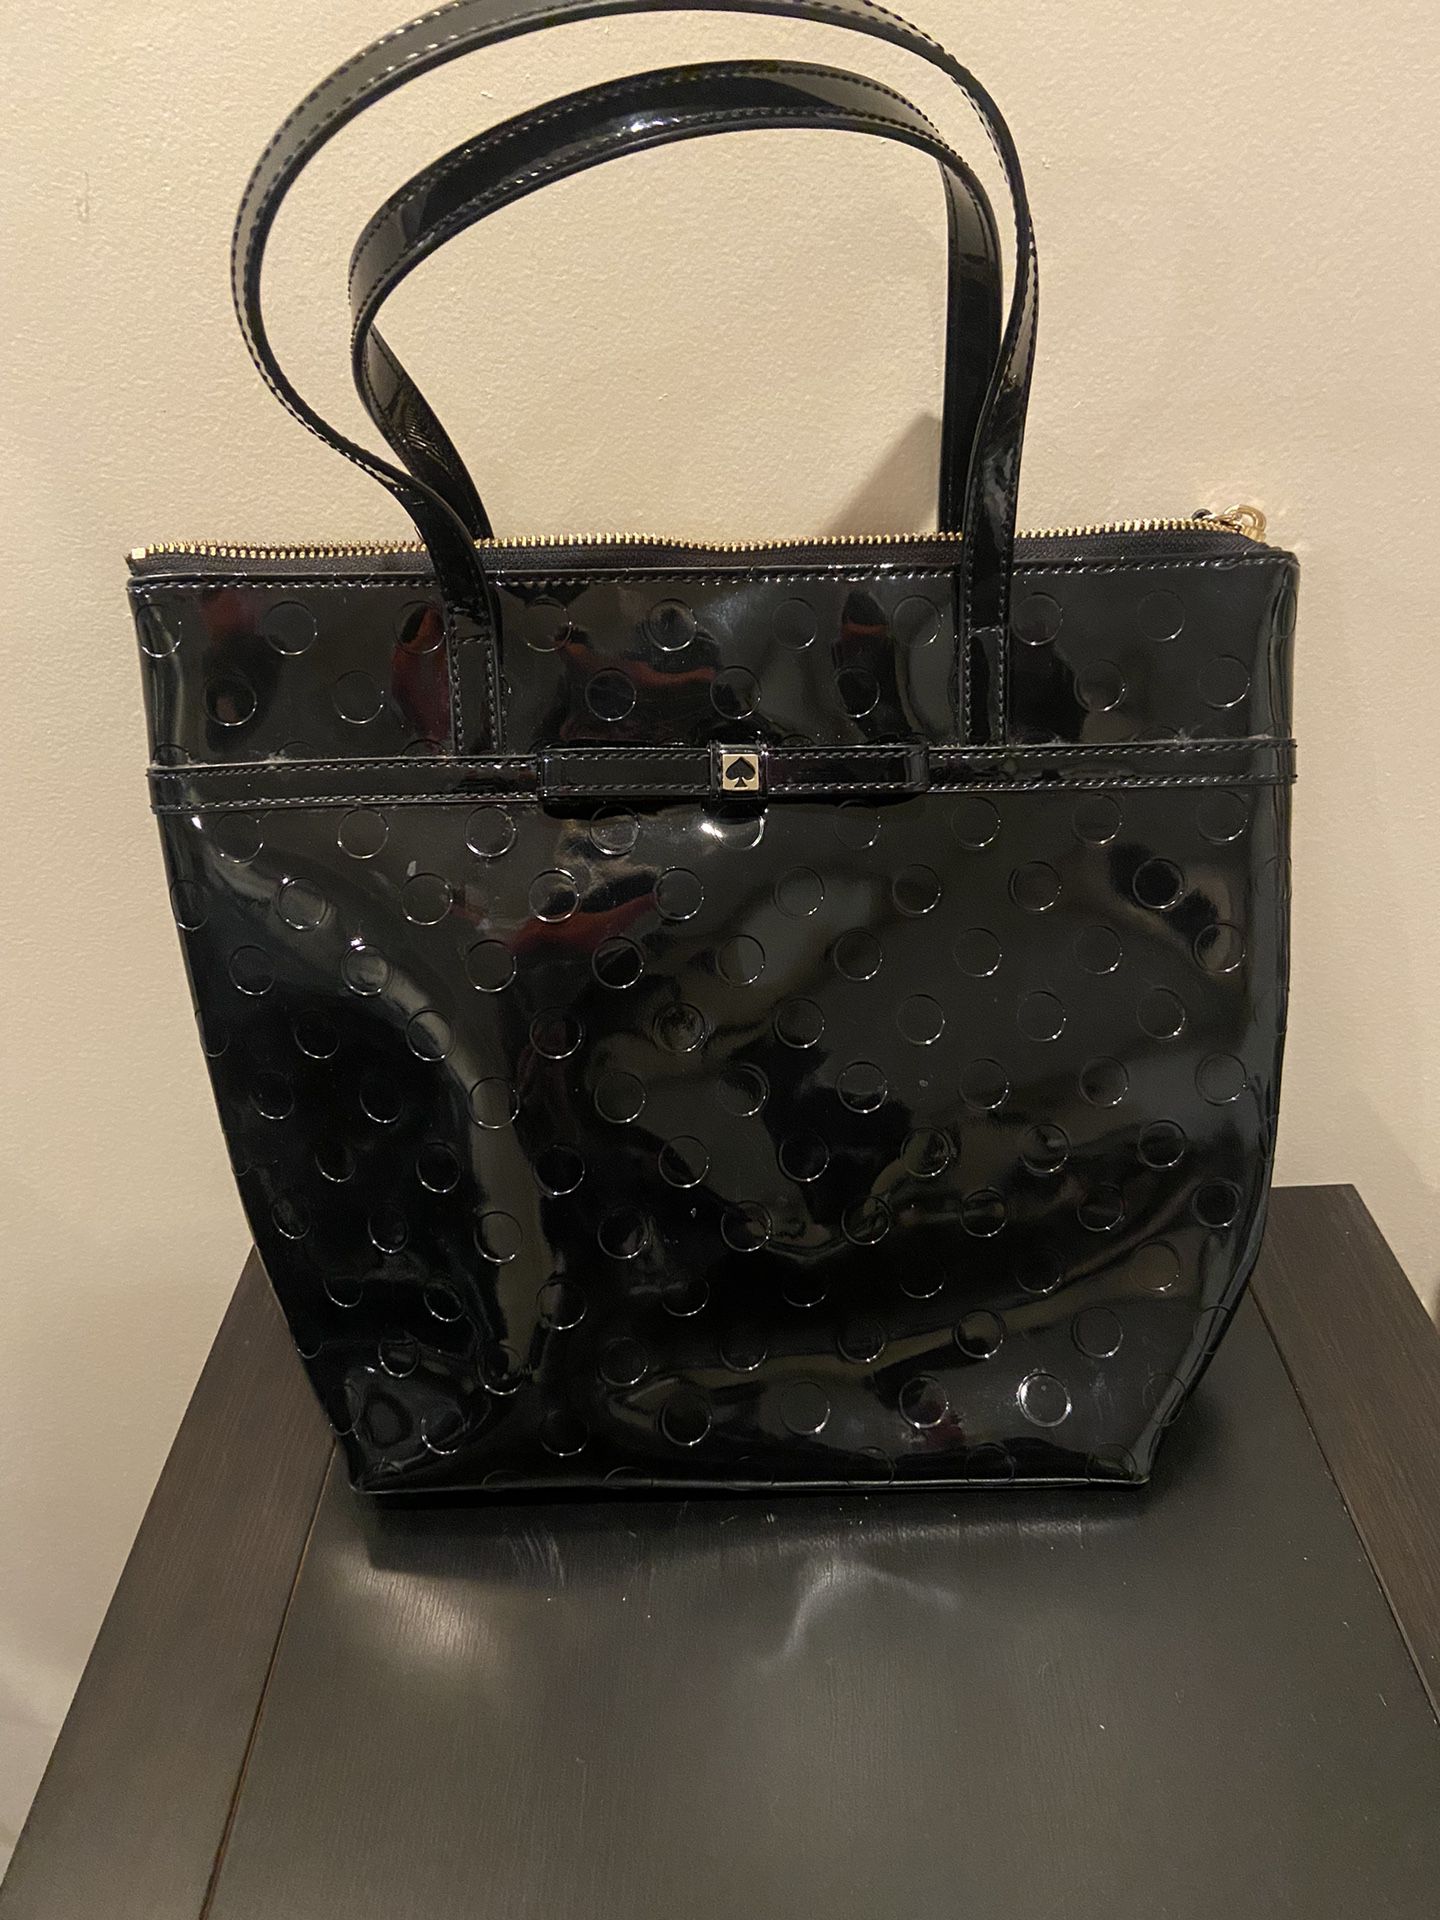 Kate Spade Jeralyn Camellia Street Black Small Tote Bag for Sale in  Montgmry, IL - OfferUp